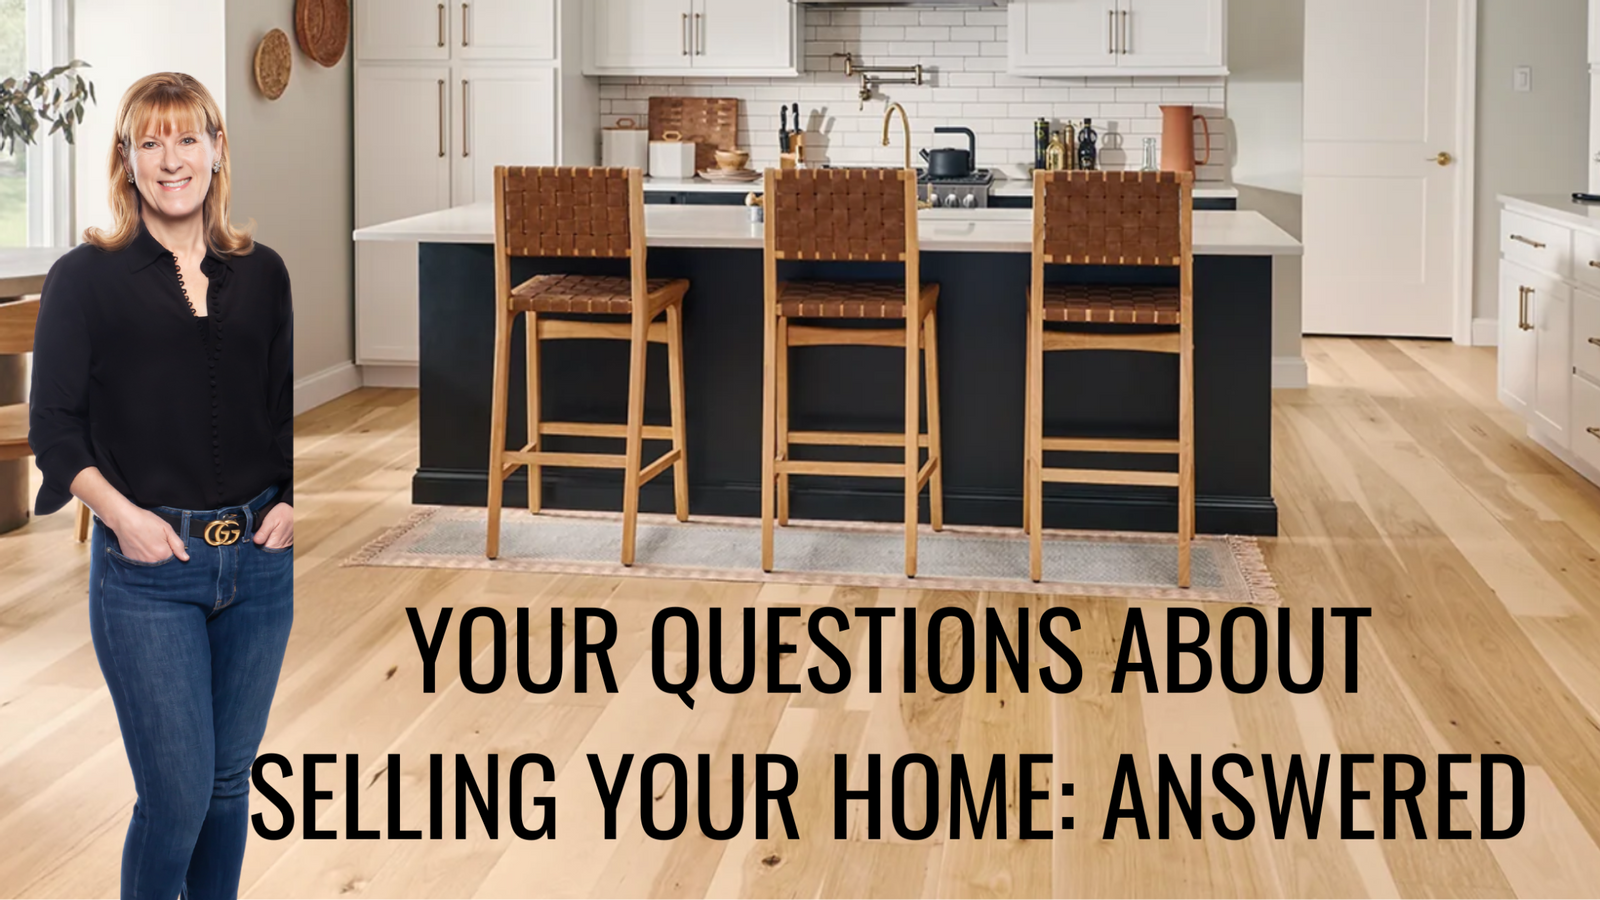 Your Questions About Selling your home: Answered